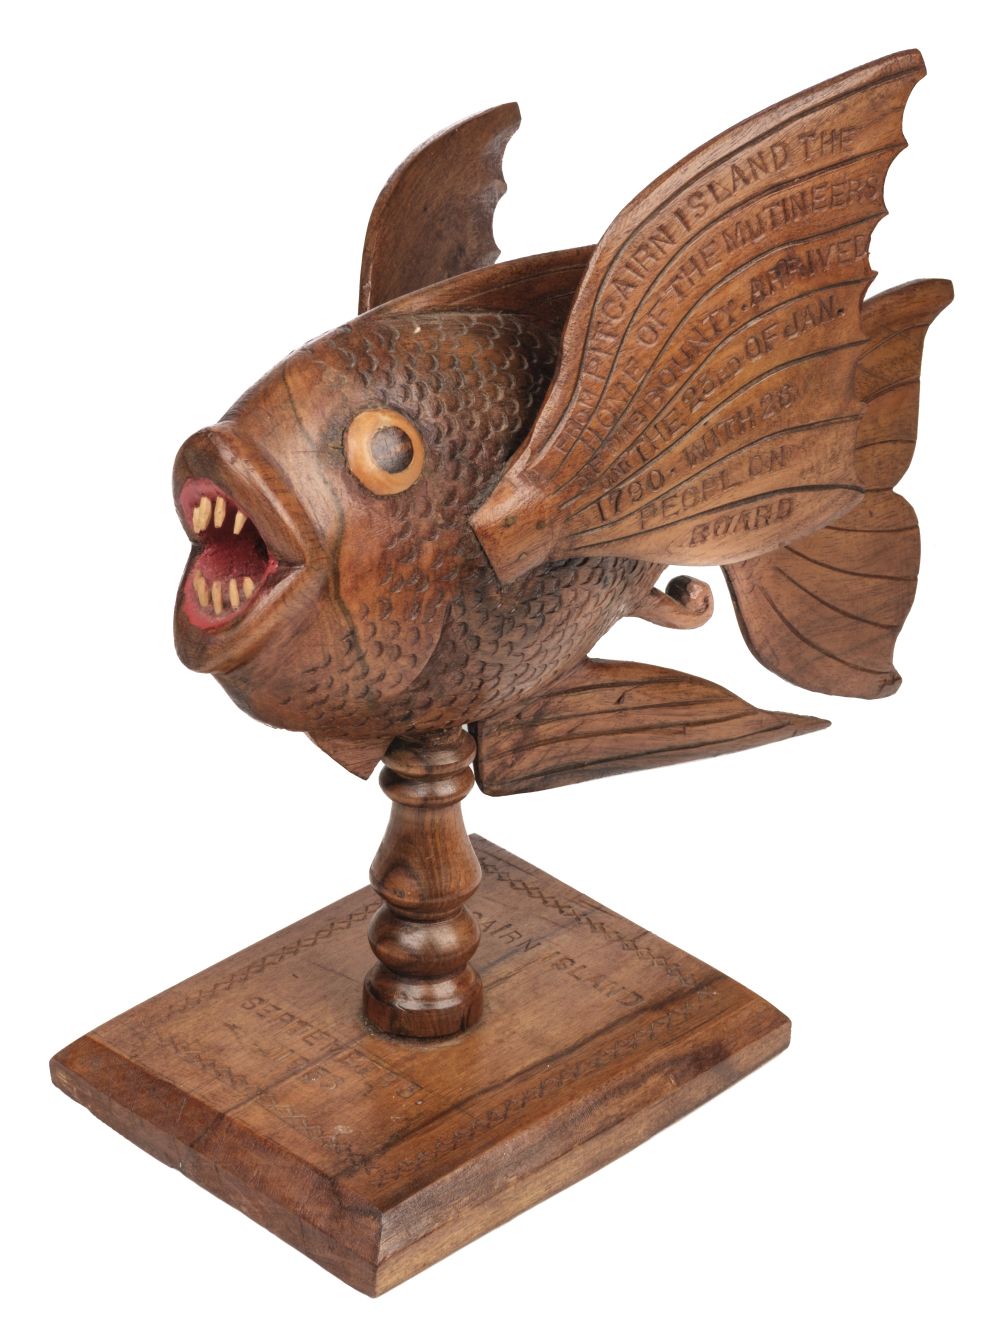 Premium Photo  A carved wooden fish is carved in a wood.